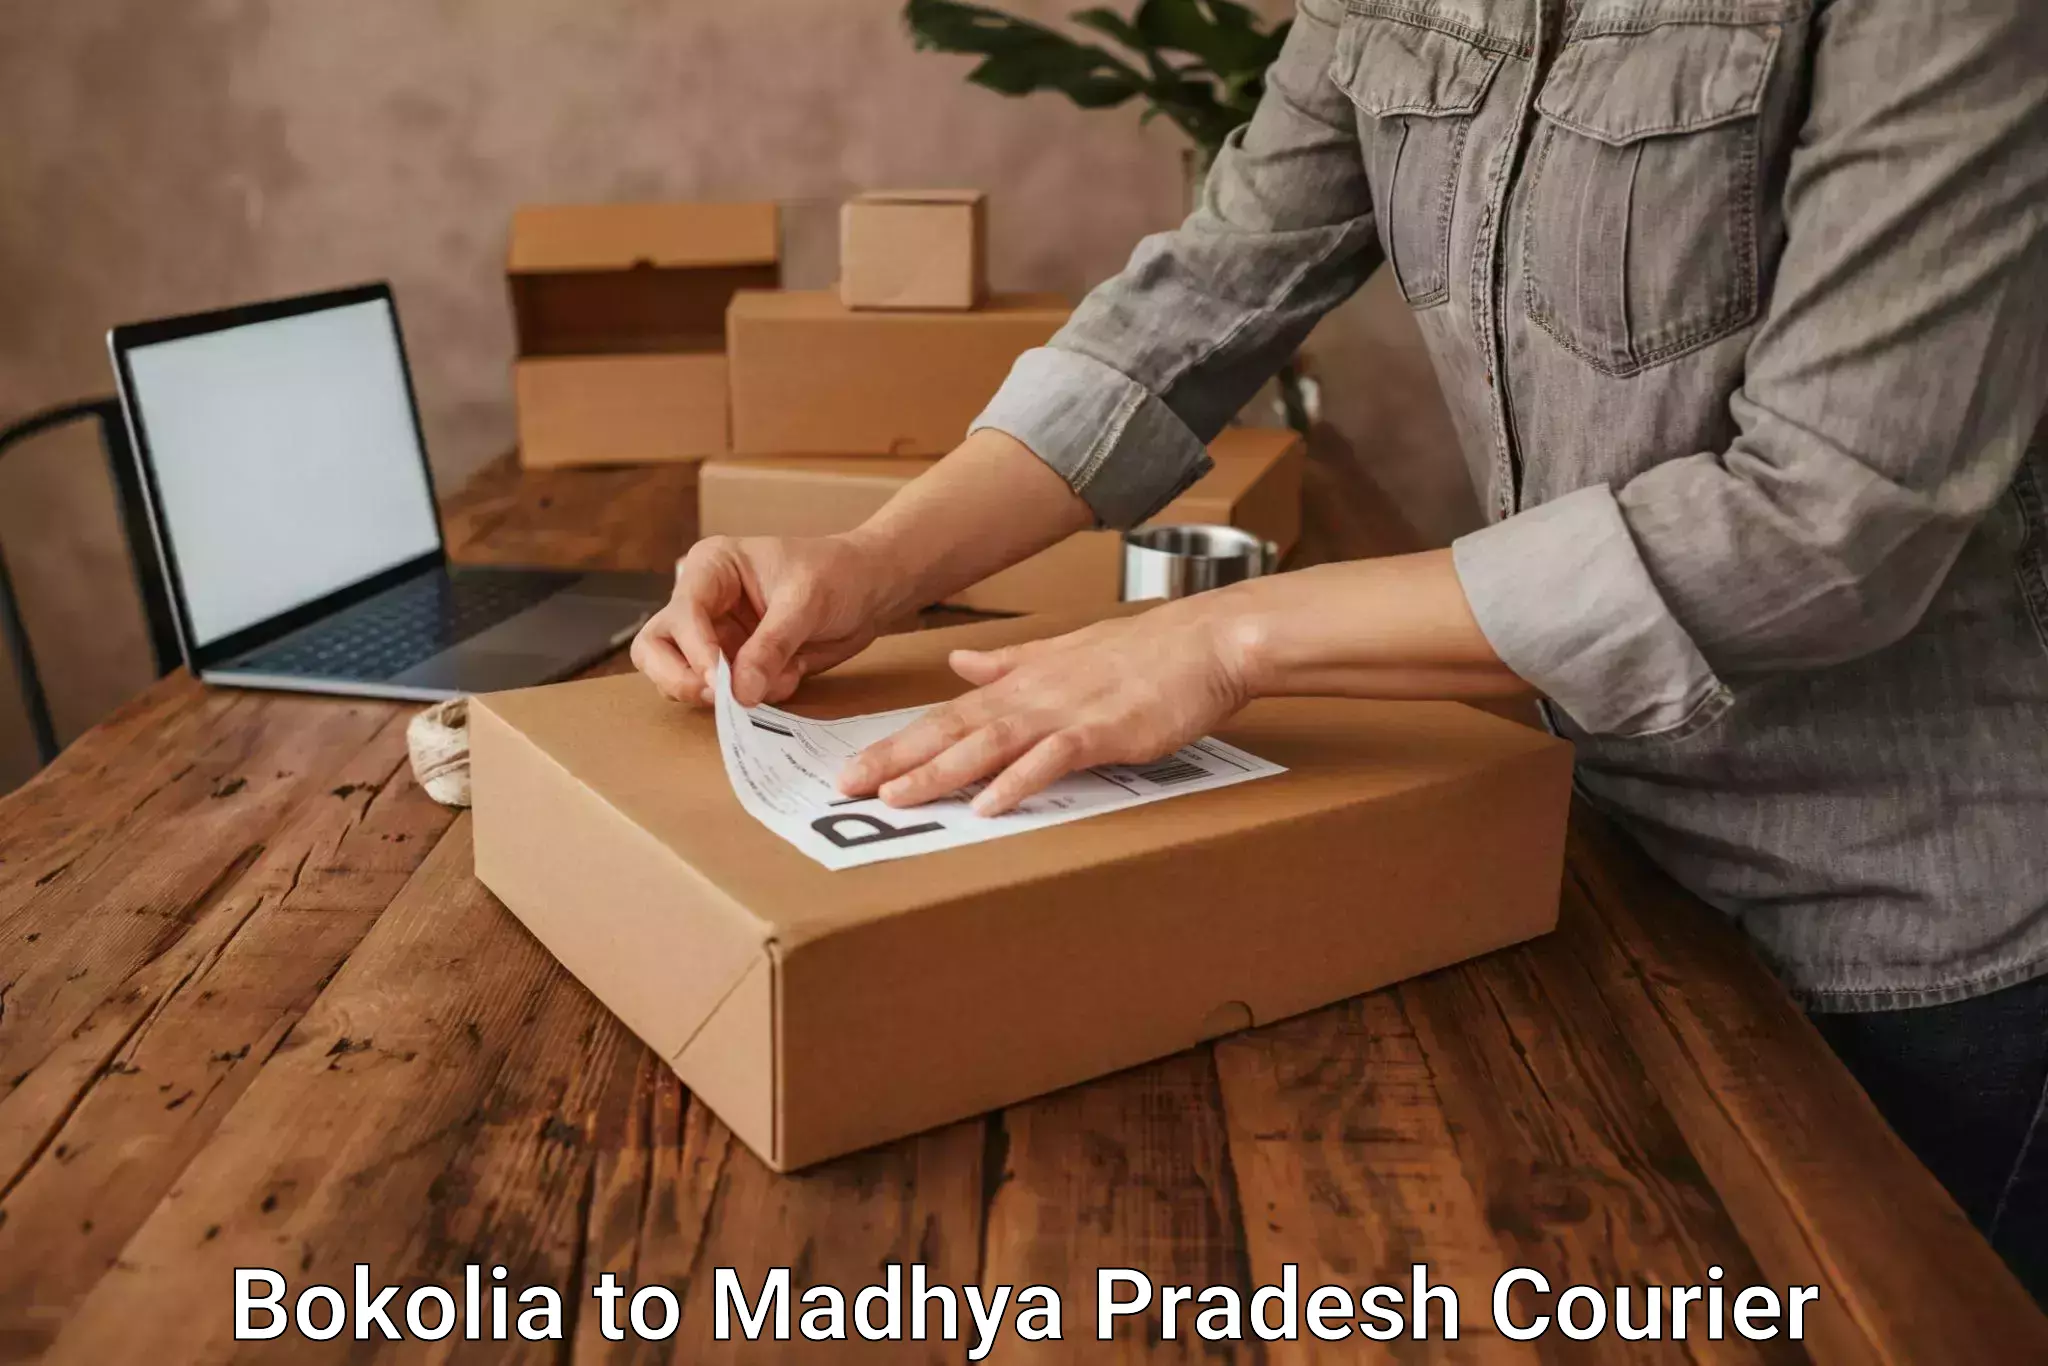 Multi-national courier services Bokolia to Depalpur